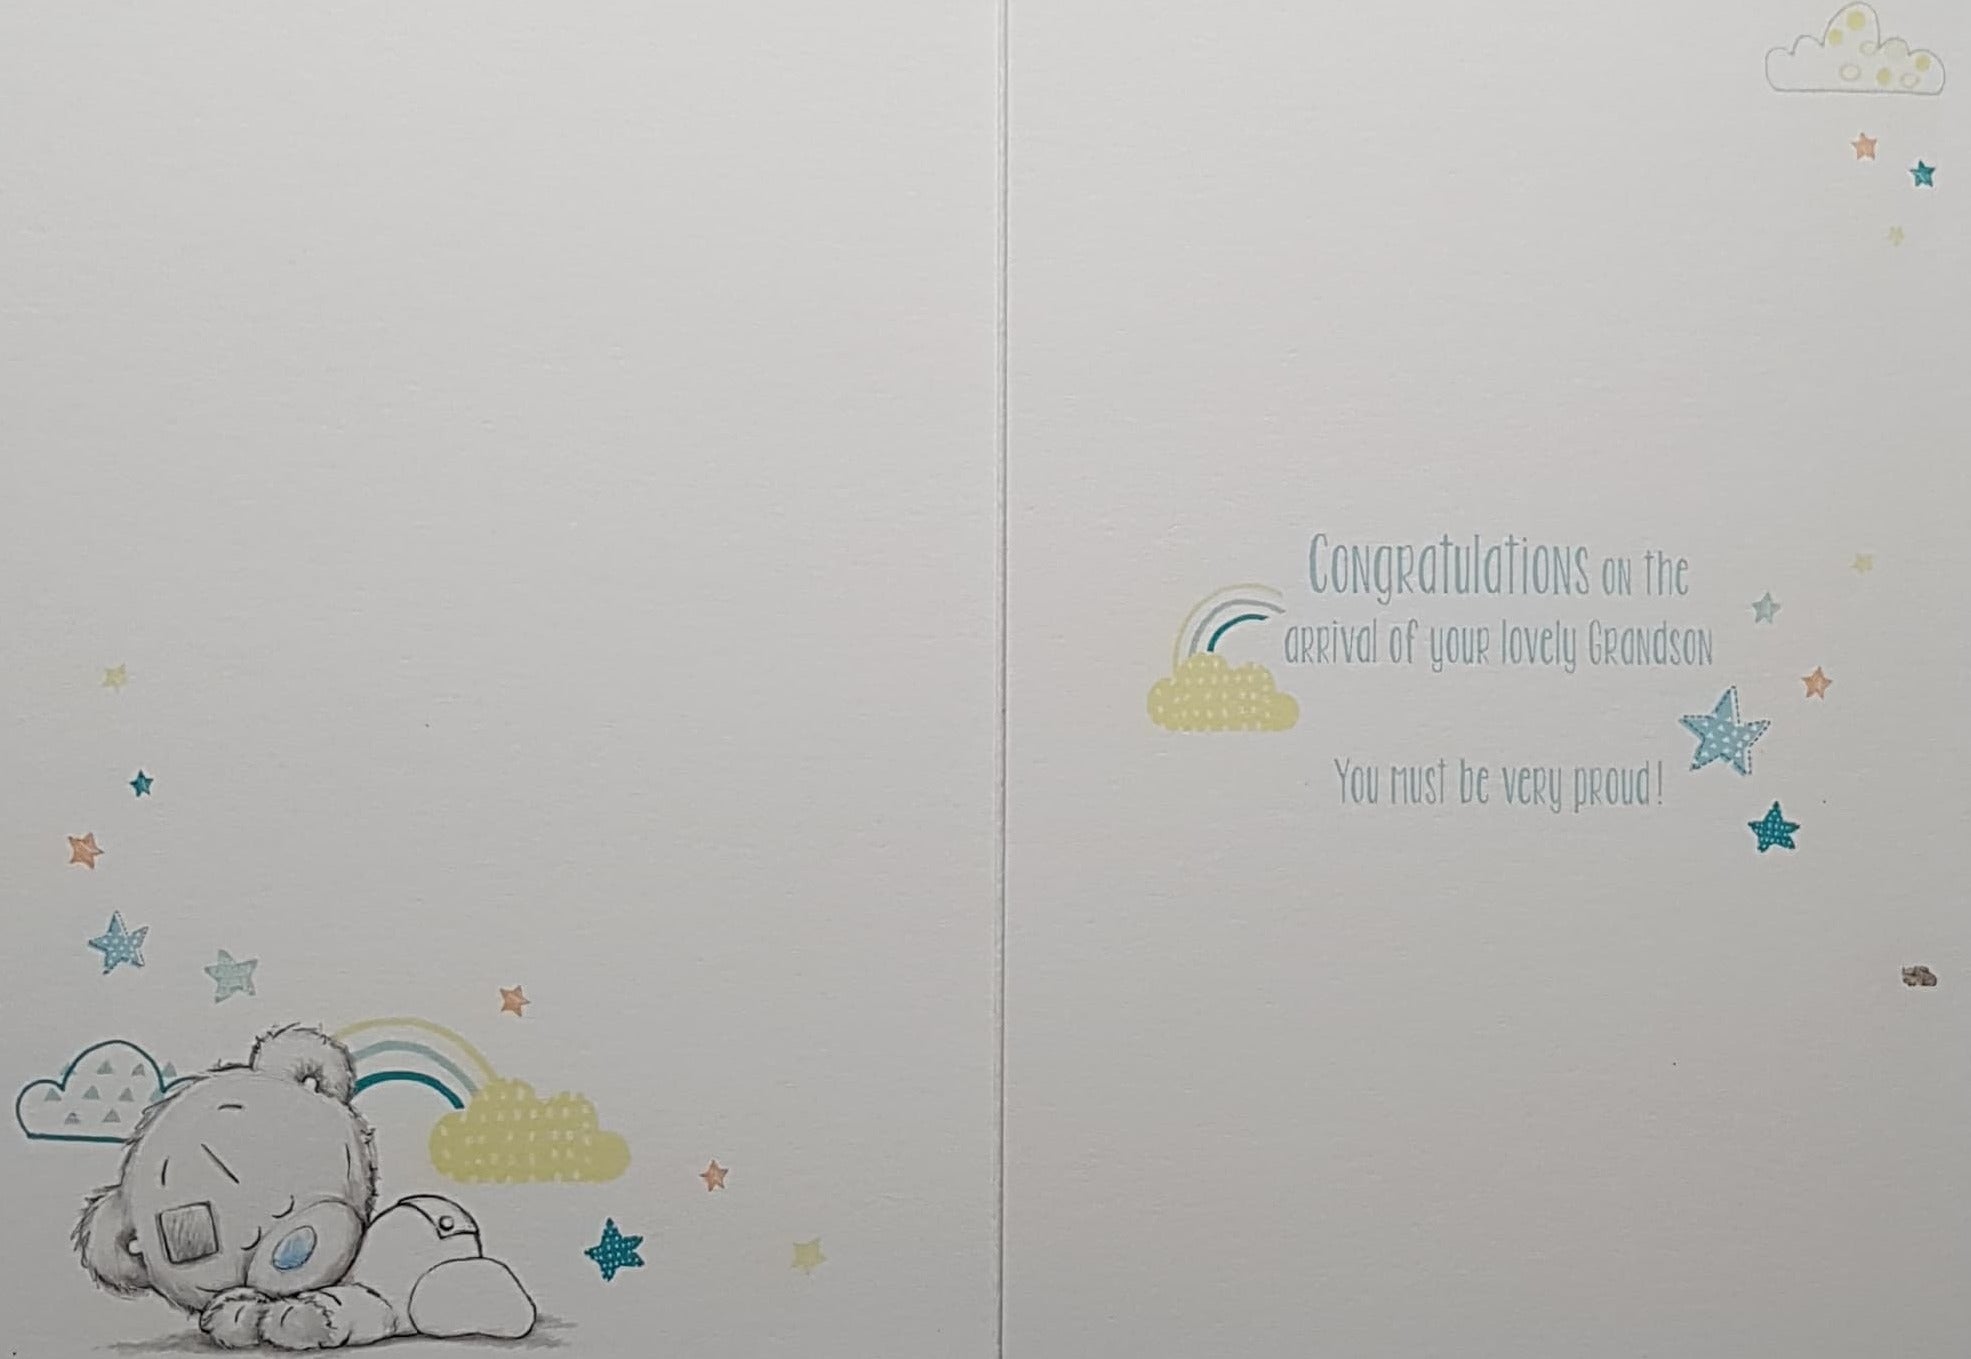 New Baby Card - New Grandson / Teddy Holding A Cloud Balloon With A Rabbit